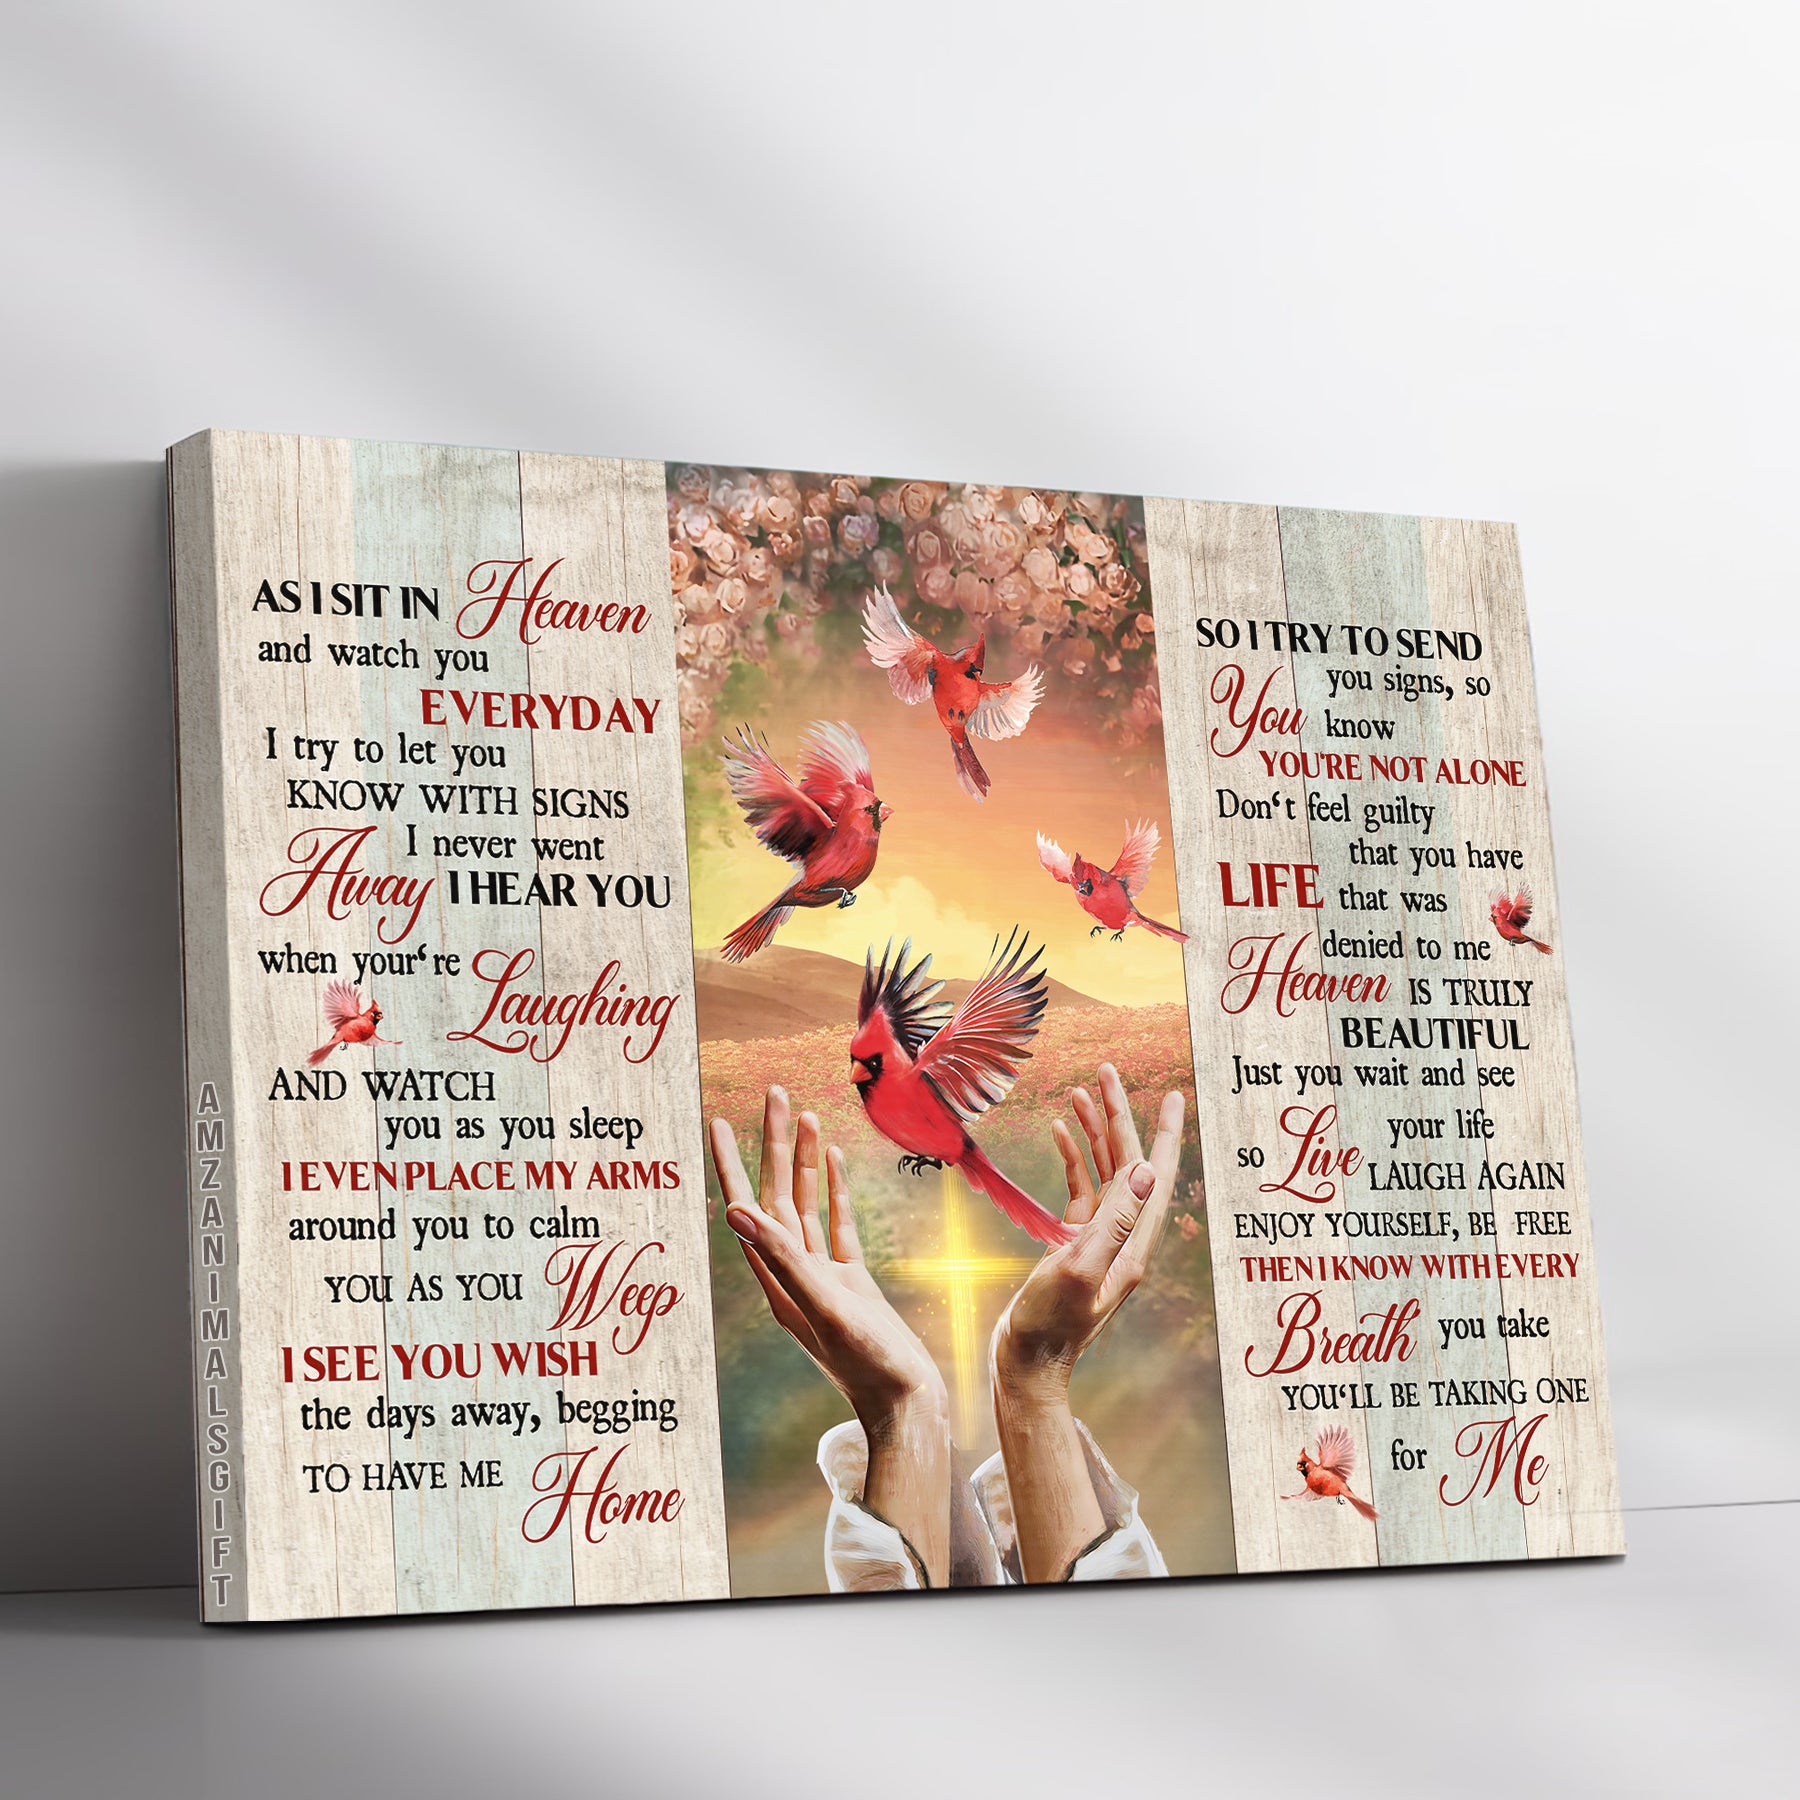 Memorial Premium Wrapped Landscape Canvas - Beautiful Cardinal, Rose Background, Pretty Sunset, As I Sit In Heaven - Perfect Gift For Members Family